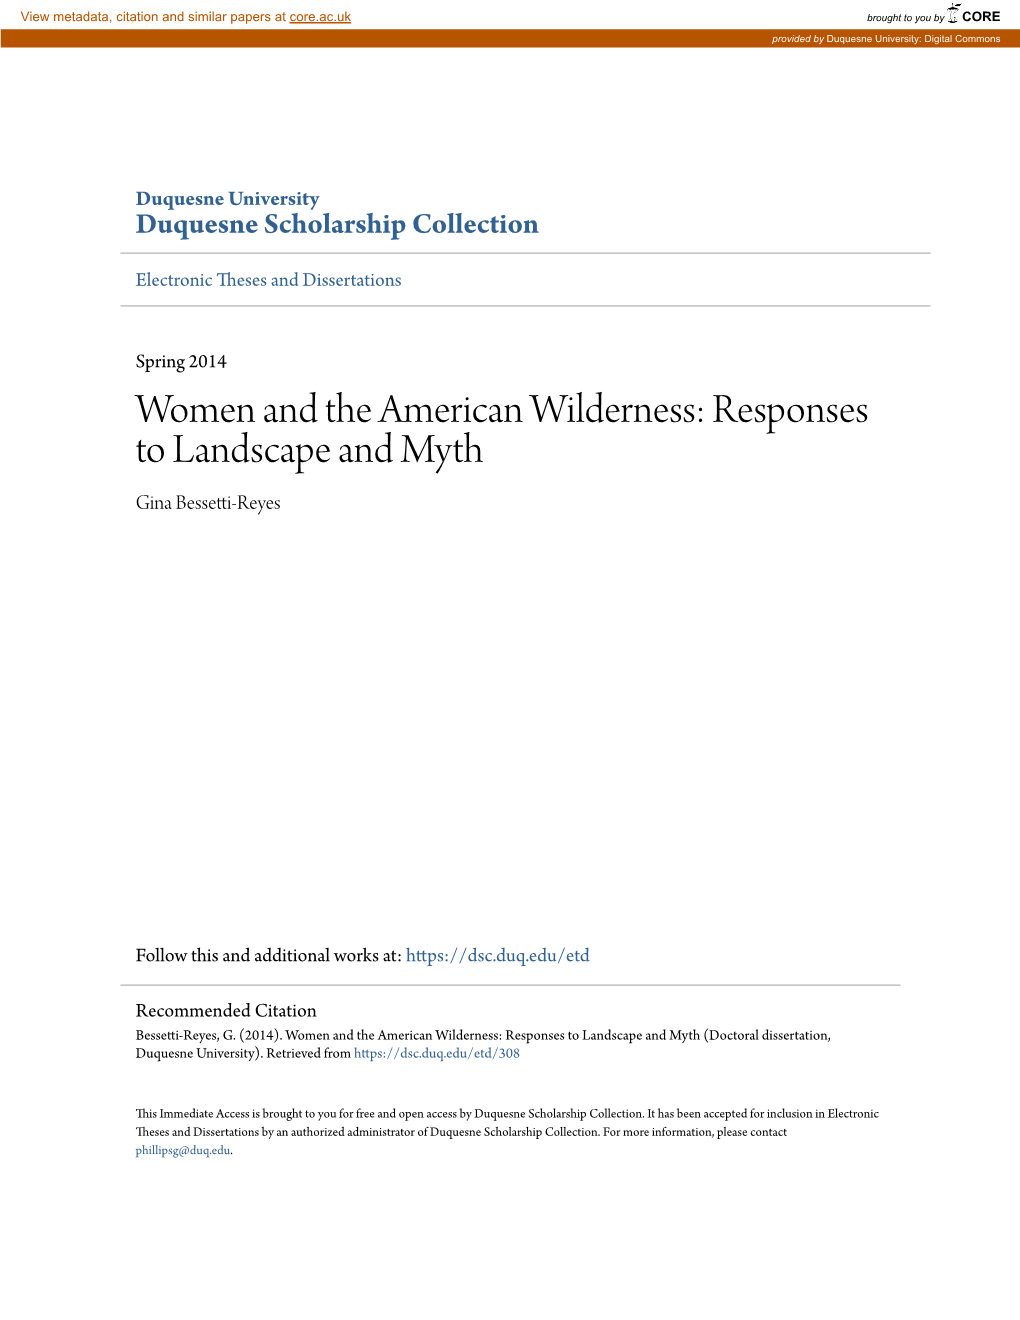 Women and the American Wilderness: Responses to Landscape and Myth Gina Bessetti-Reyes